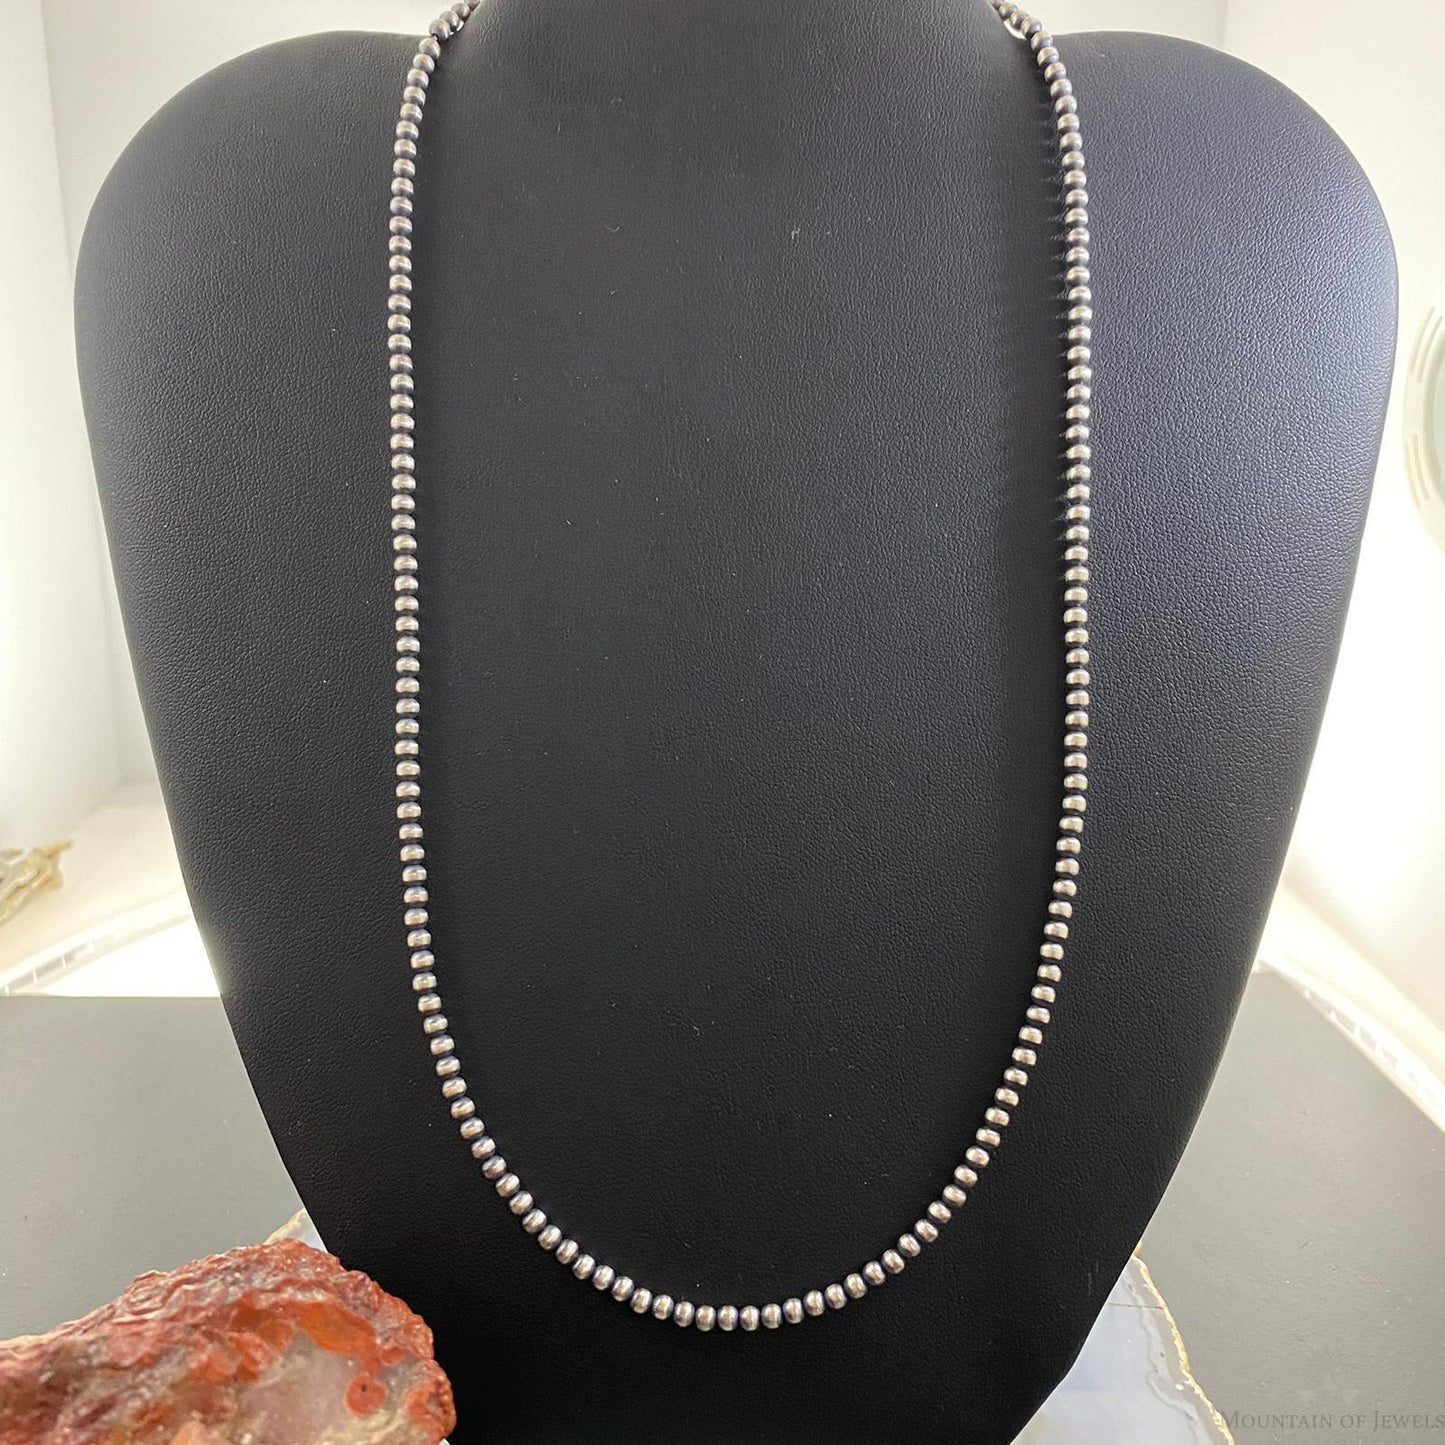 Navajo Pearl Beads 3 mm Sterling Silver Necklace 18" For Women